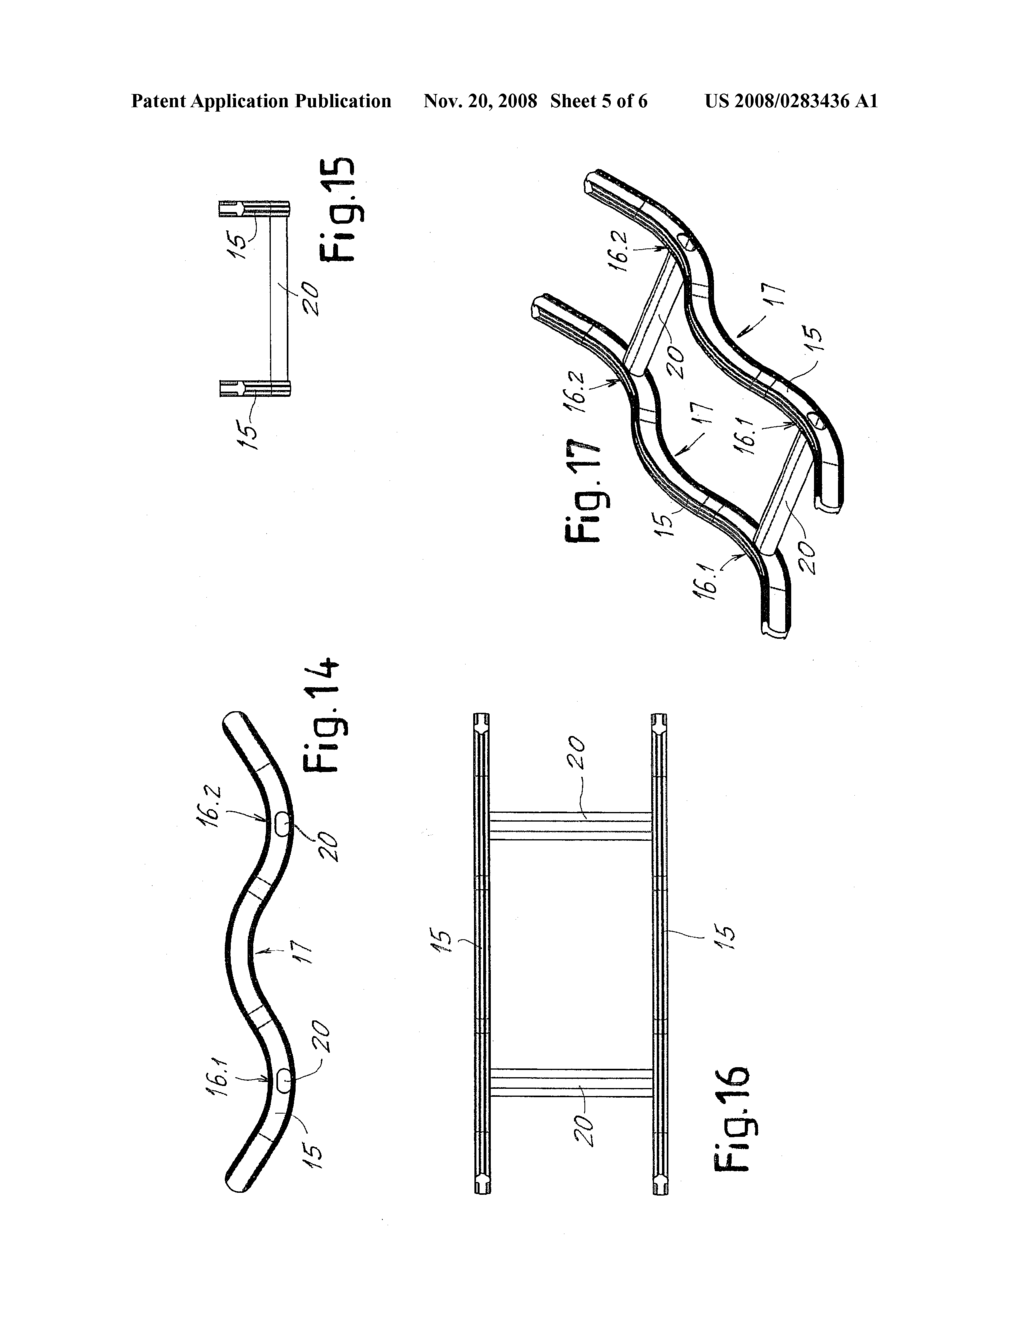 SUPPORTING STRUCTURE FOR STORING AND HANDLING SO-CALLED 